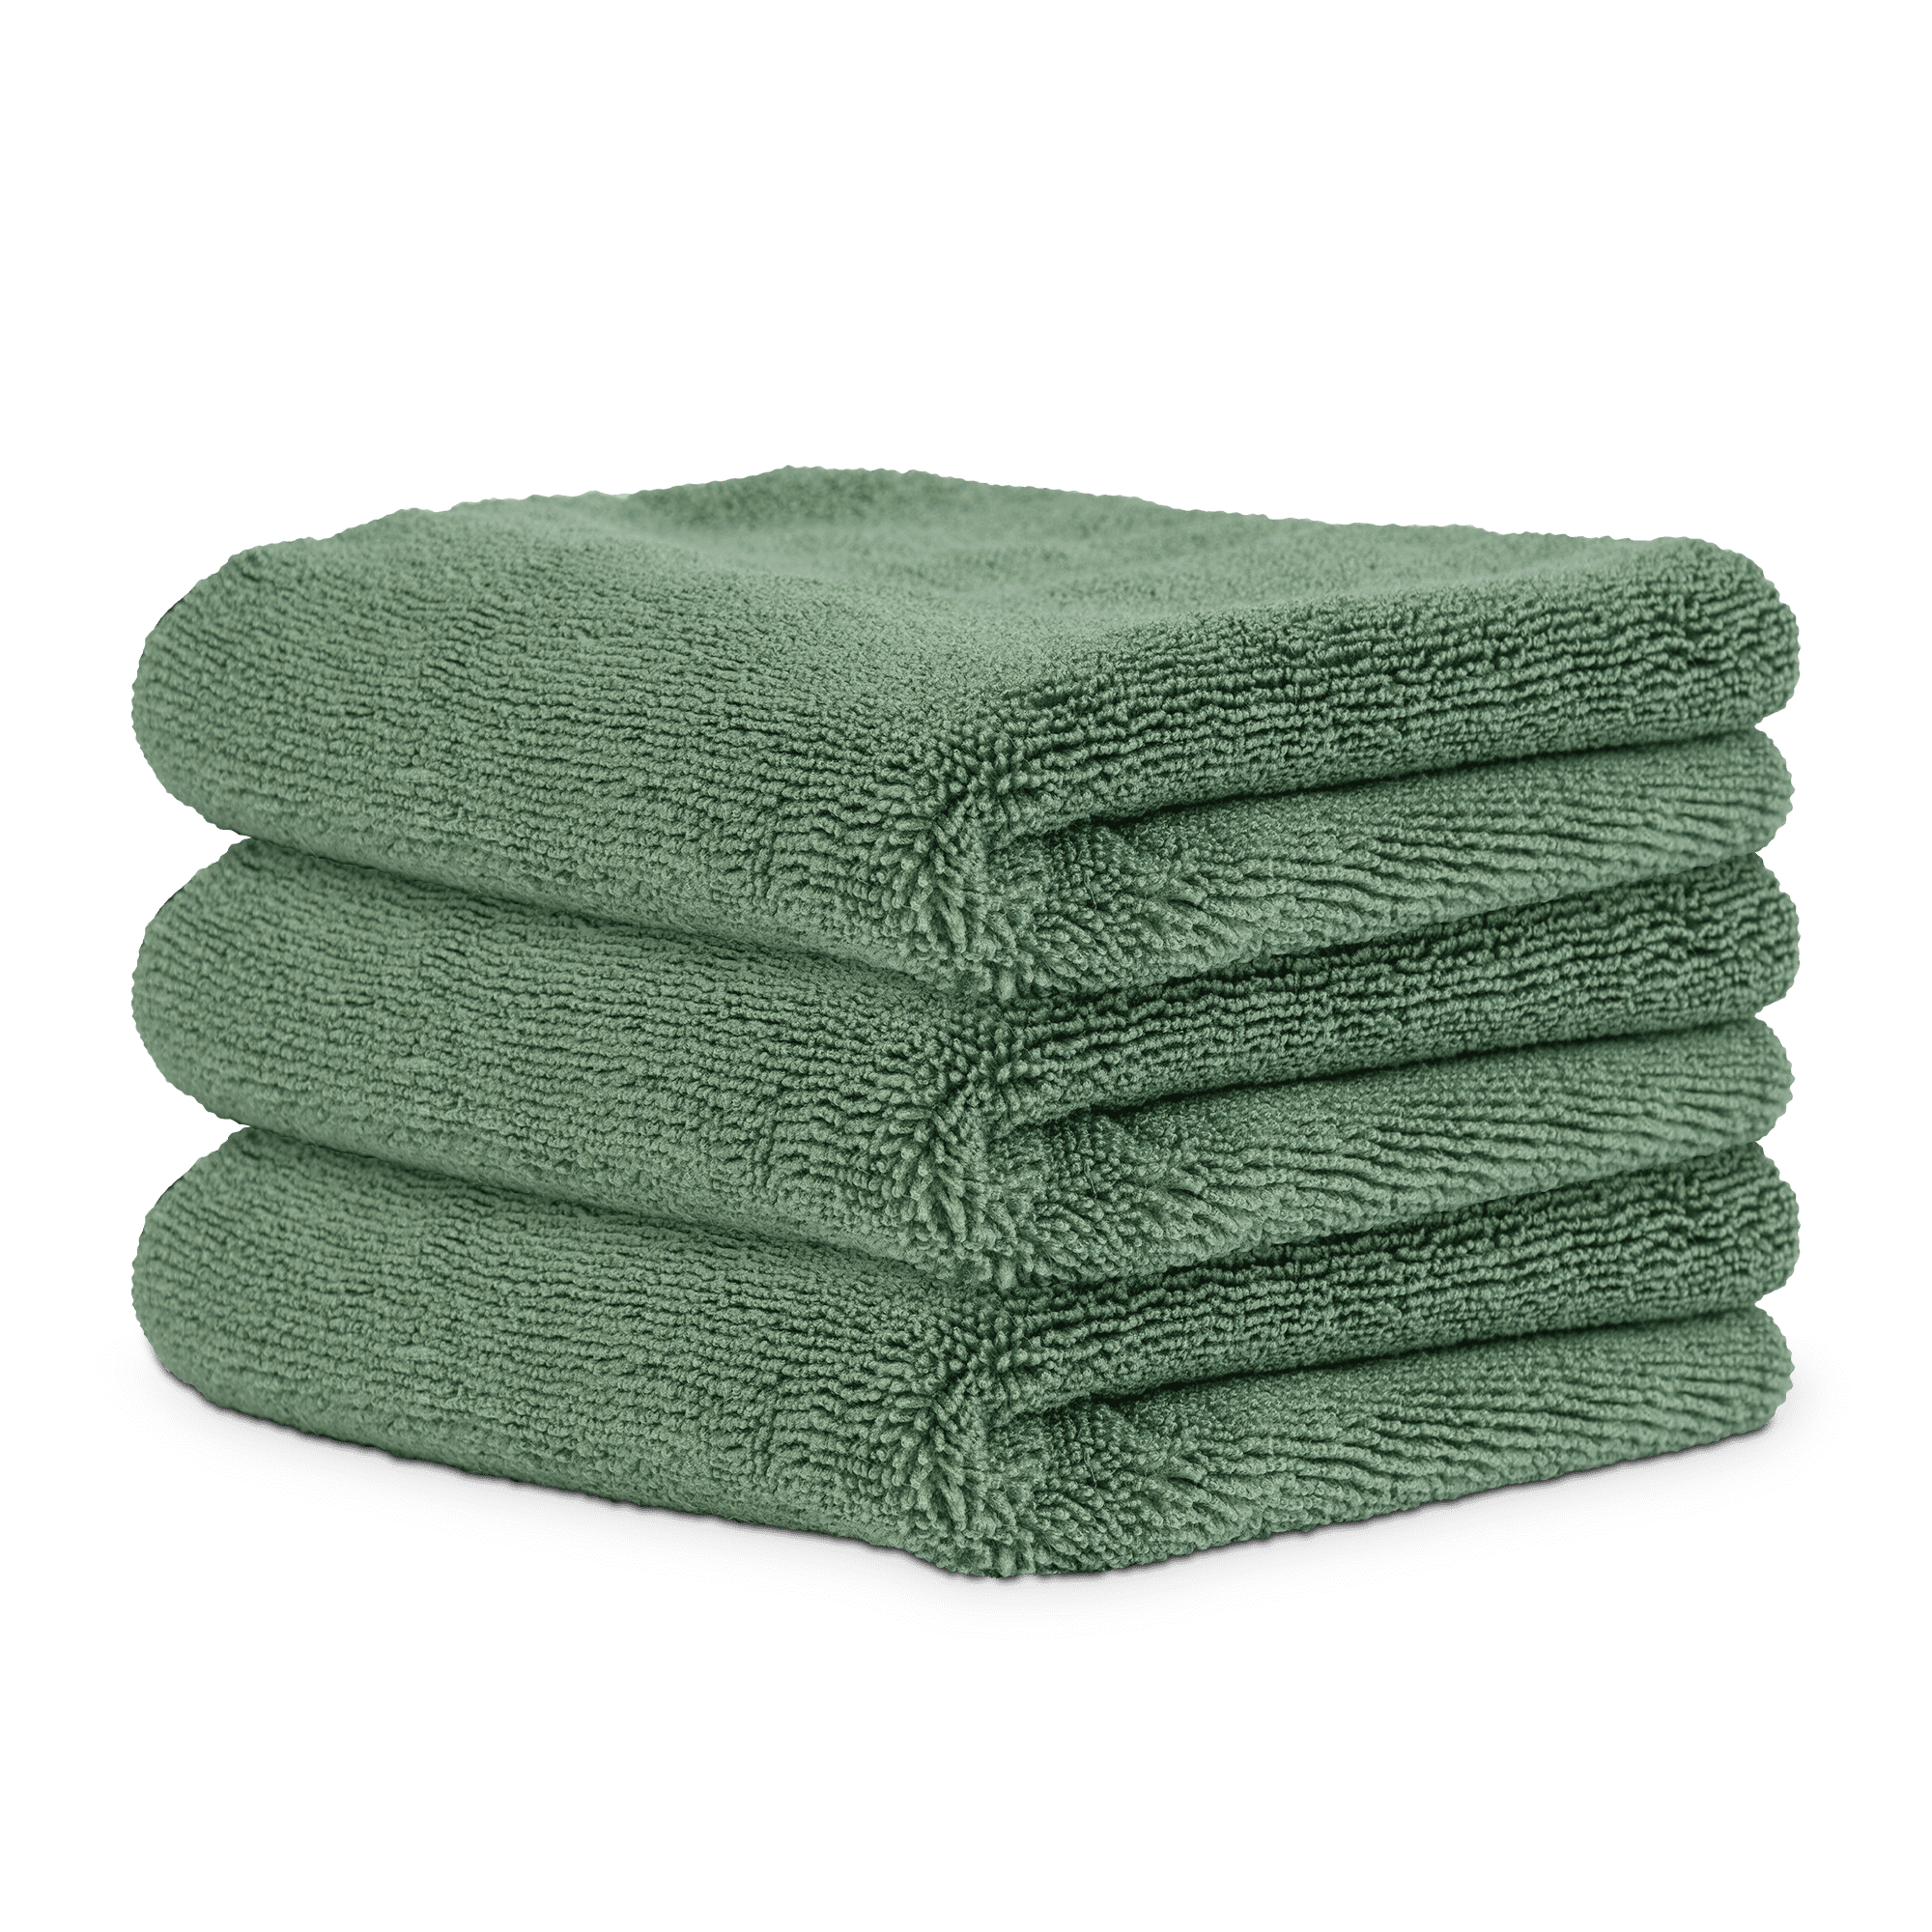 Chemical Guys Ultimate Super Plush Drying Towel - Olive Green - 25 x 30 in